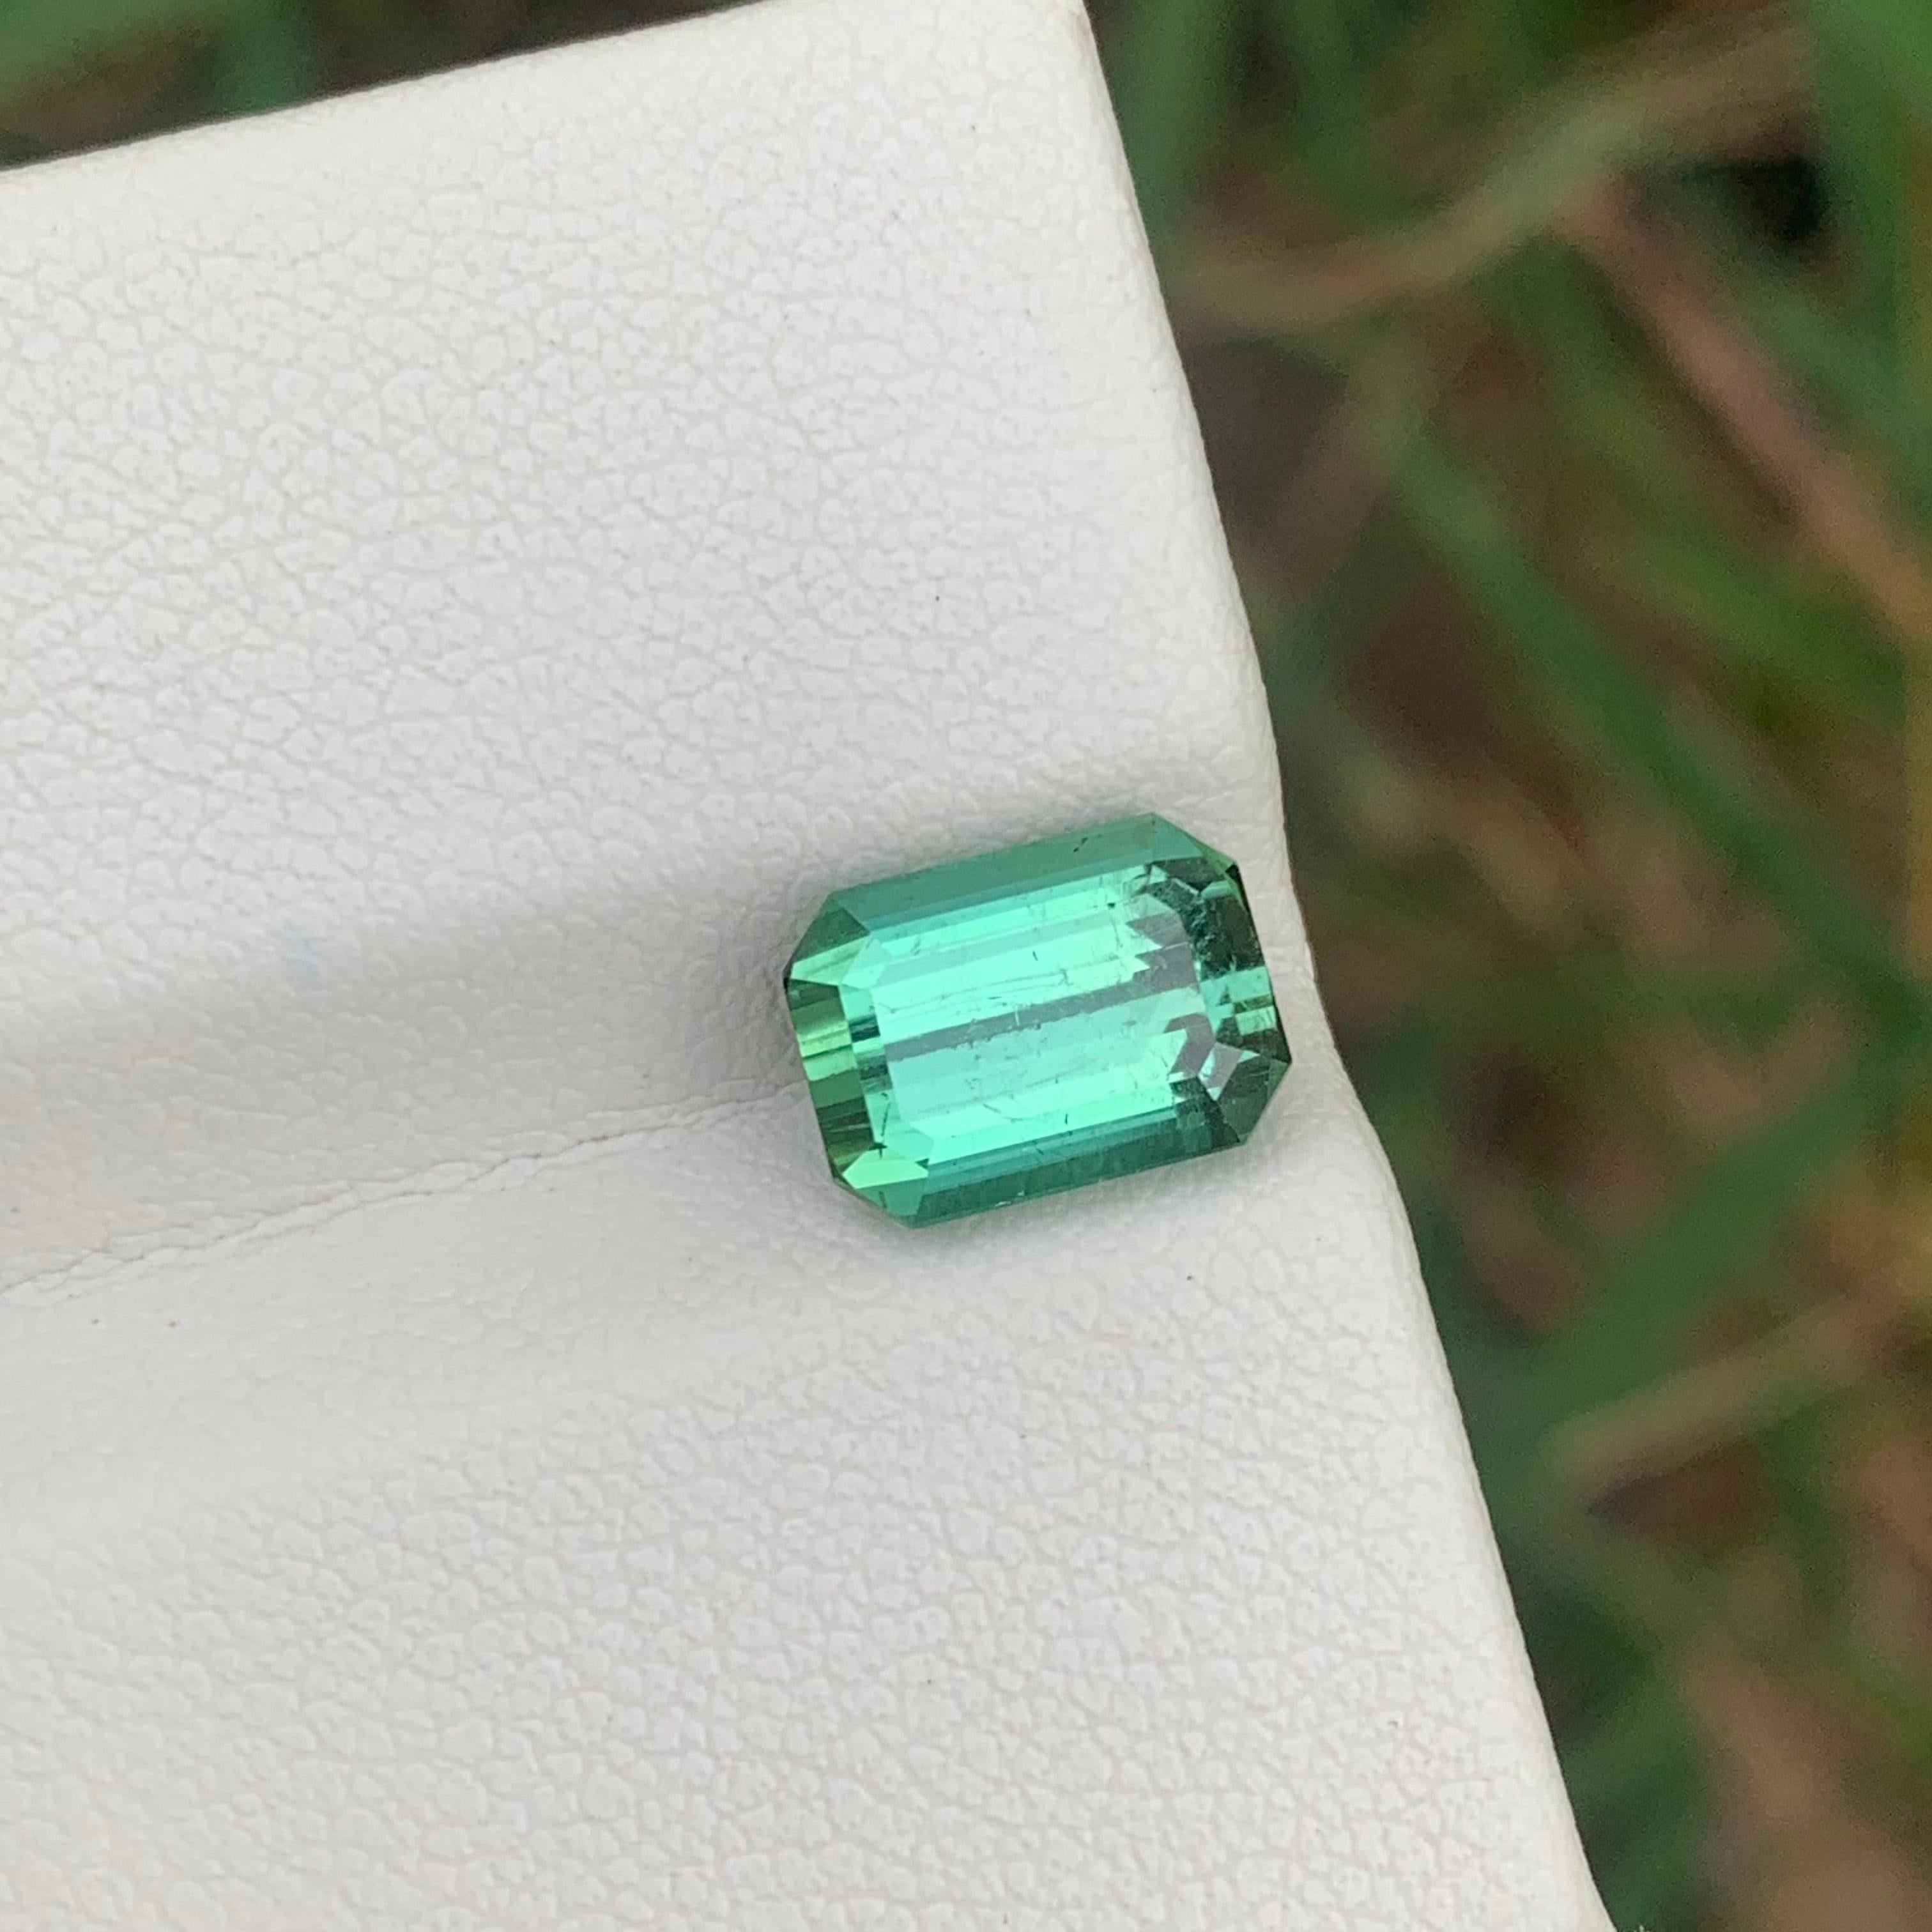 Baroque Revival 3.05 Cts Natural Loose Blueish Green Tourmaline Emerald Cut Ring Gemstone  For Sale